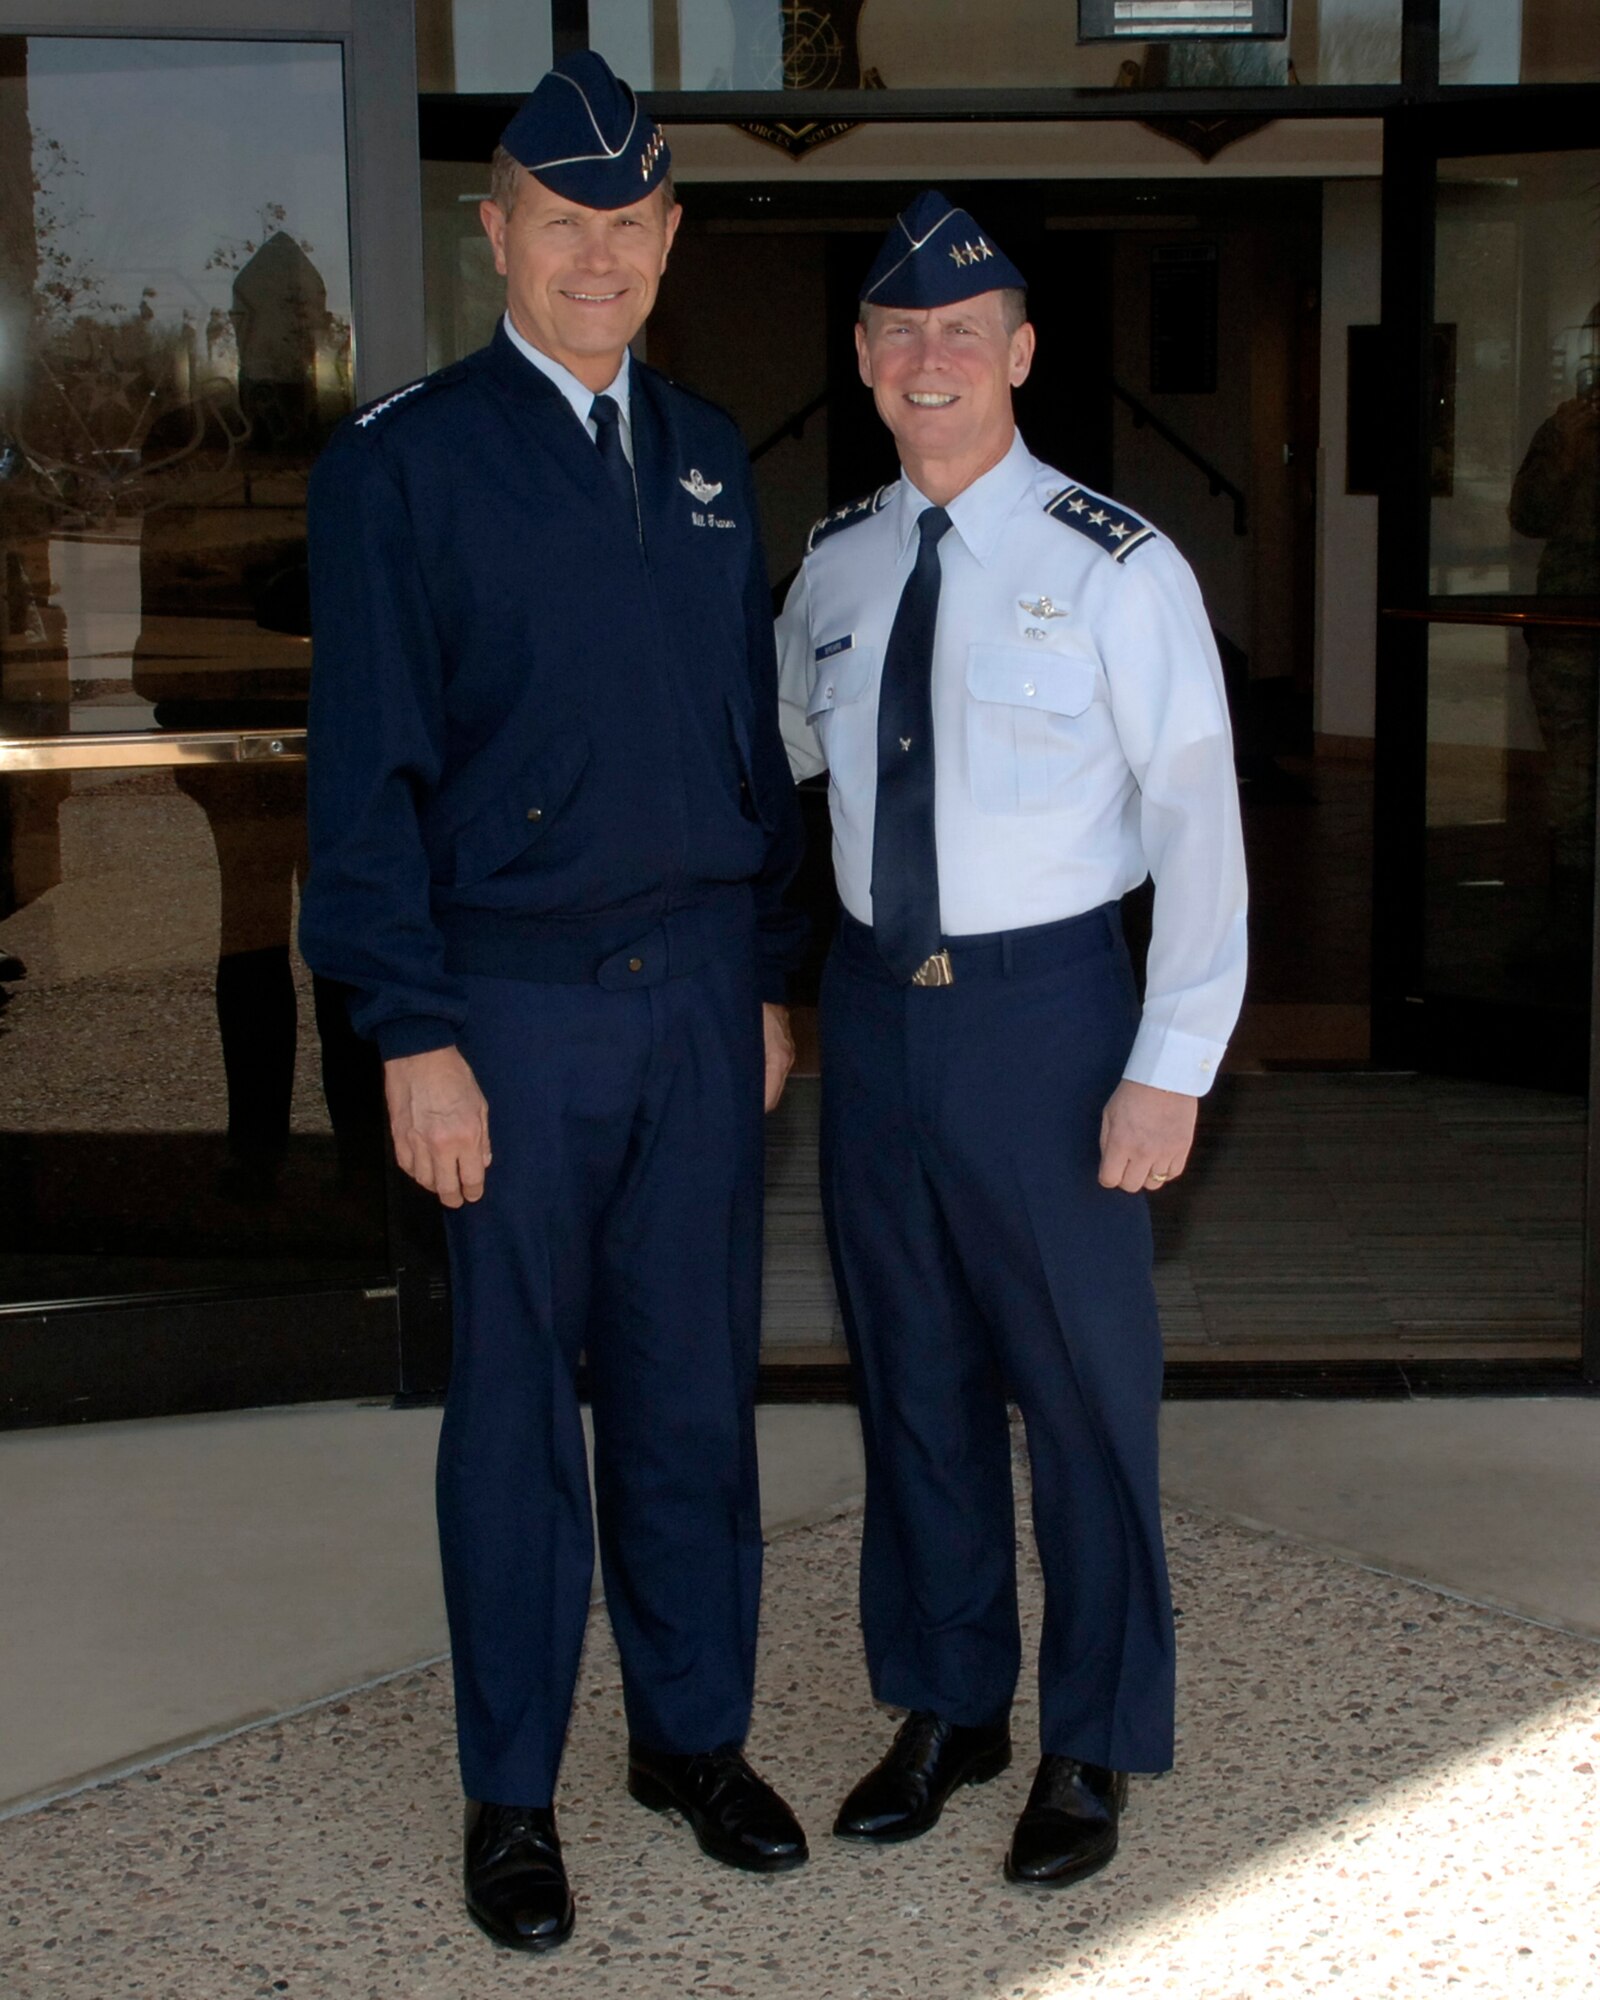 DAVIS-MONTHAN AFB, Ariz. -- Gen. William M. Fraser (left), Air Combat Command commander, stands for a photo with Lt. Gen. Glenn Spears, 12th Air Force (Air Forces Southern) commander during a Mar. 7 visit here. (U.S. Air Force photo/Tech. Sgt. Eric Petosky) 